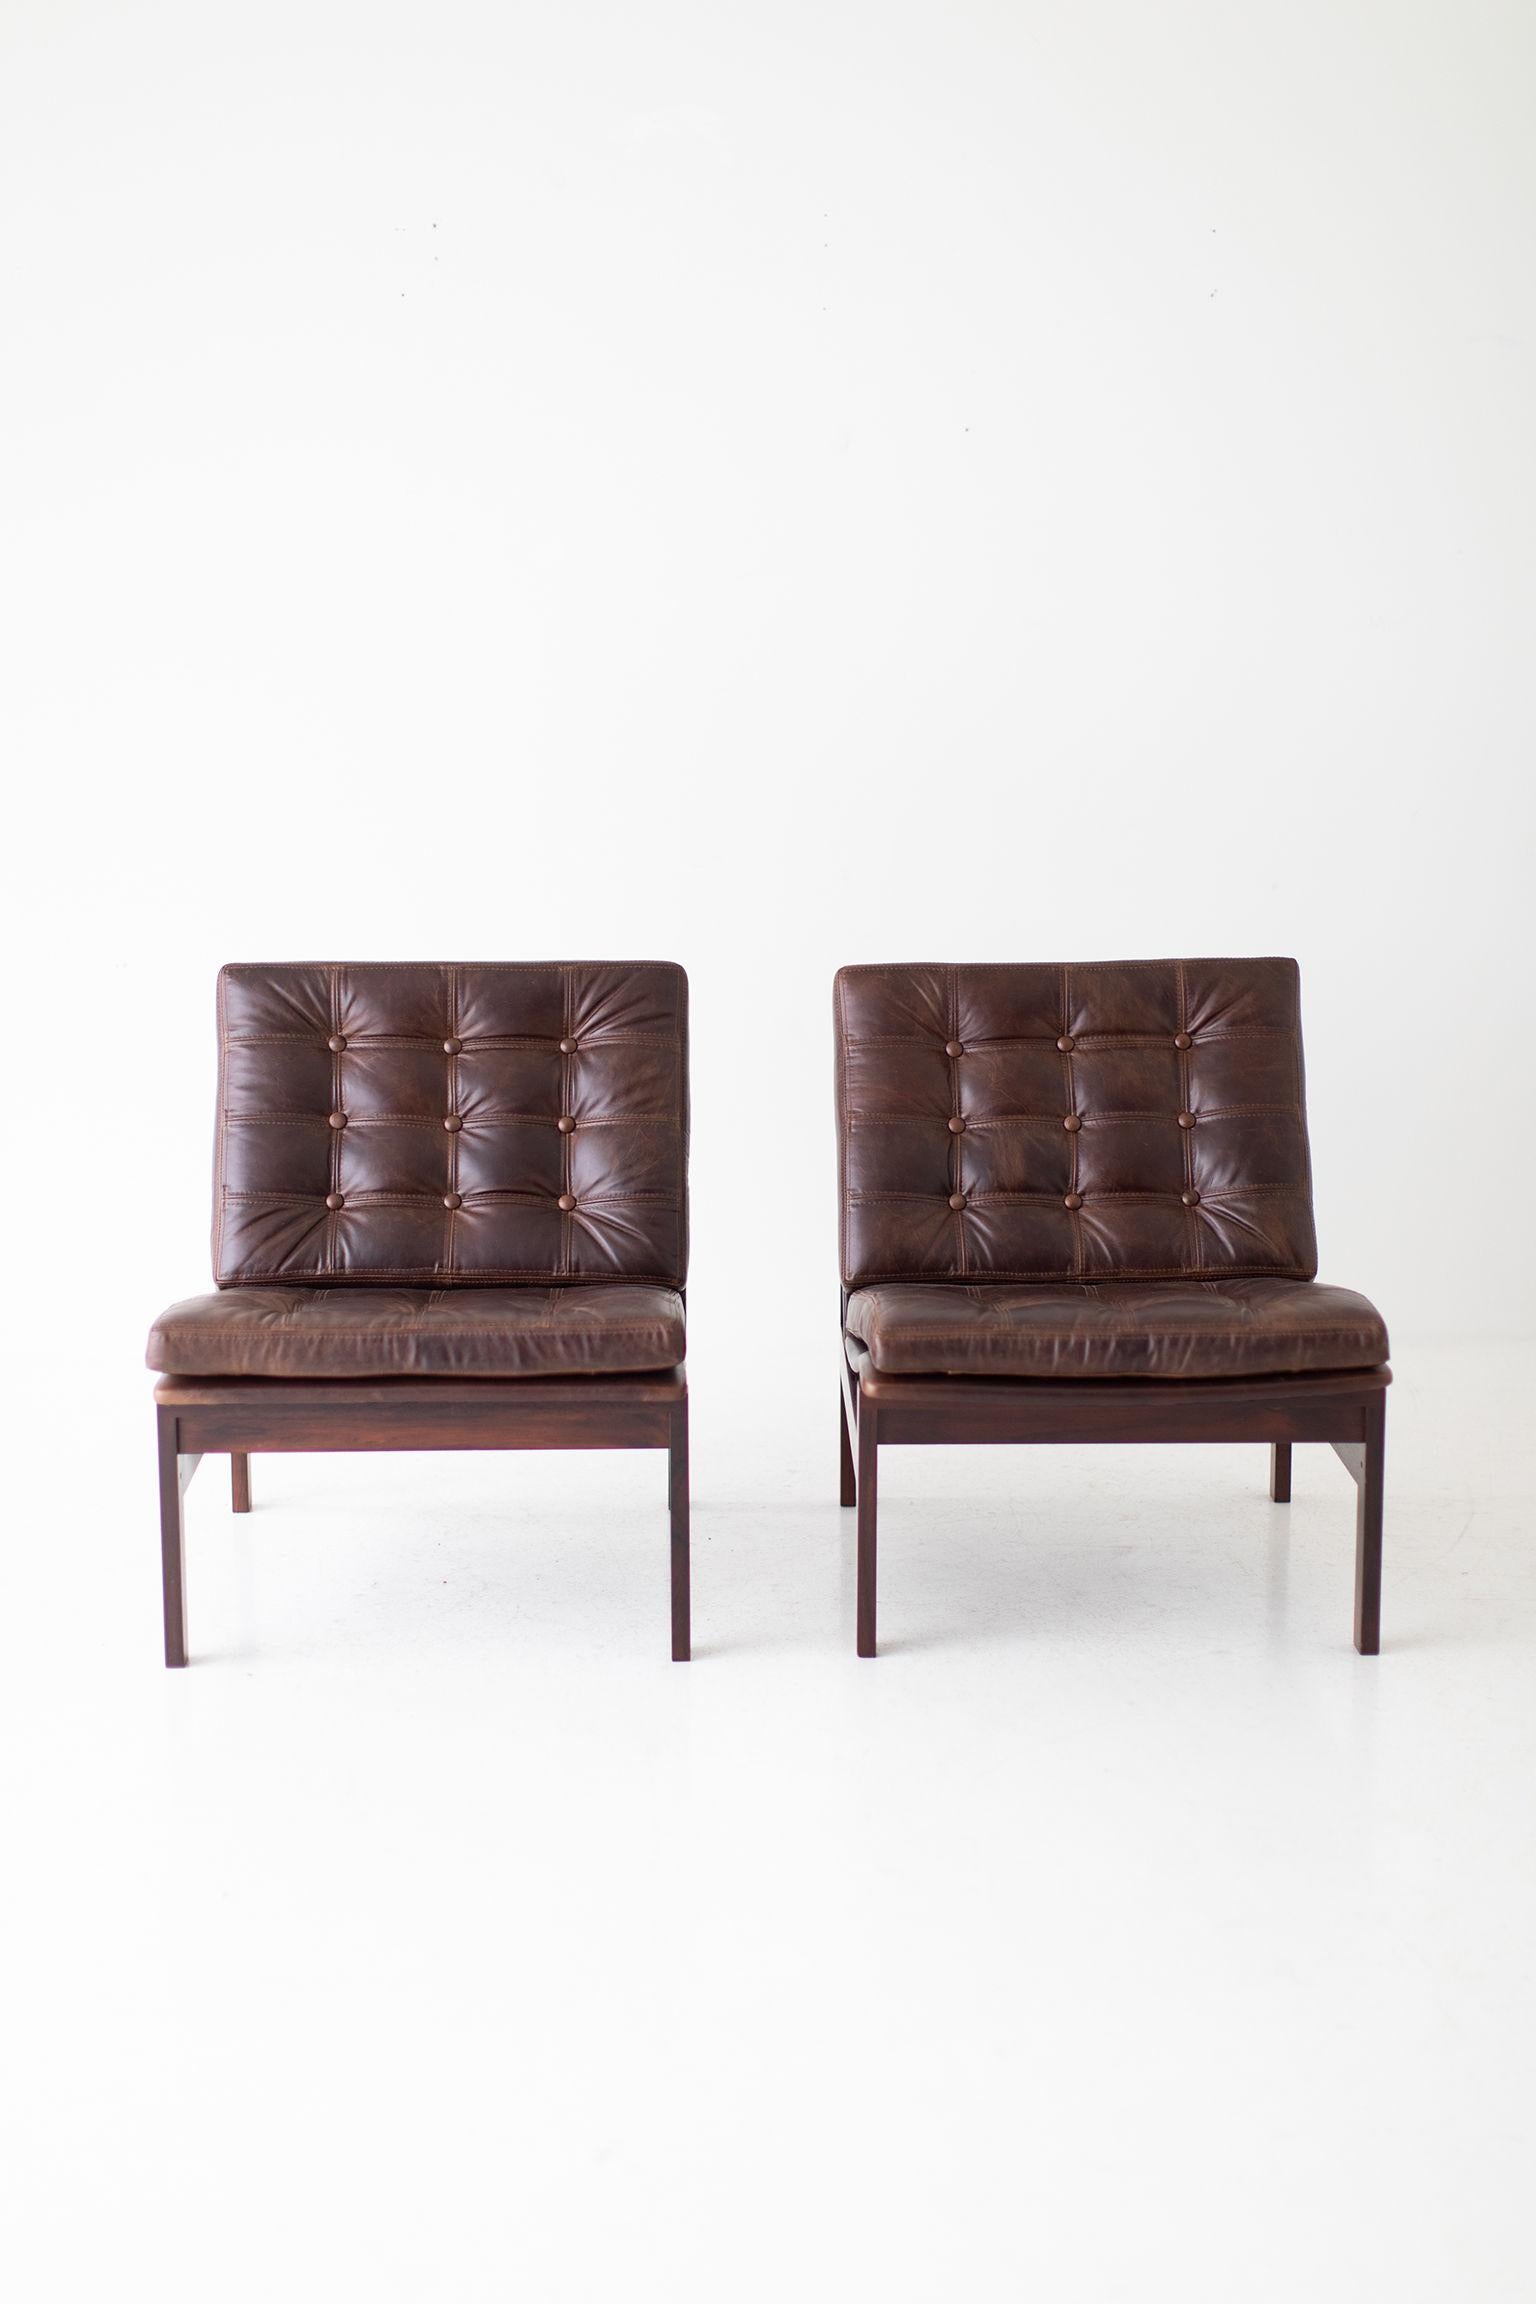 Ole Gjerløv Knudsen & Torben Lind Rosewood and Leather Lounge Chairs 4